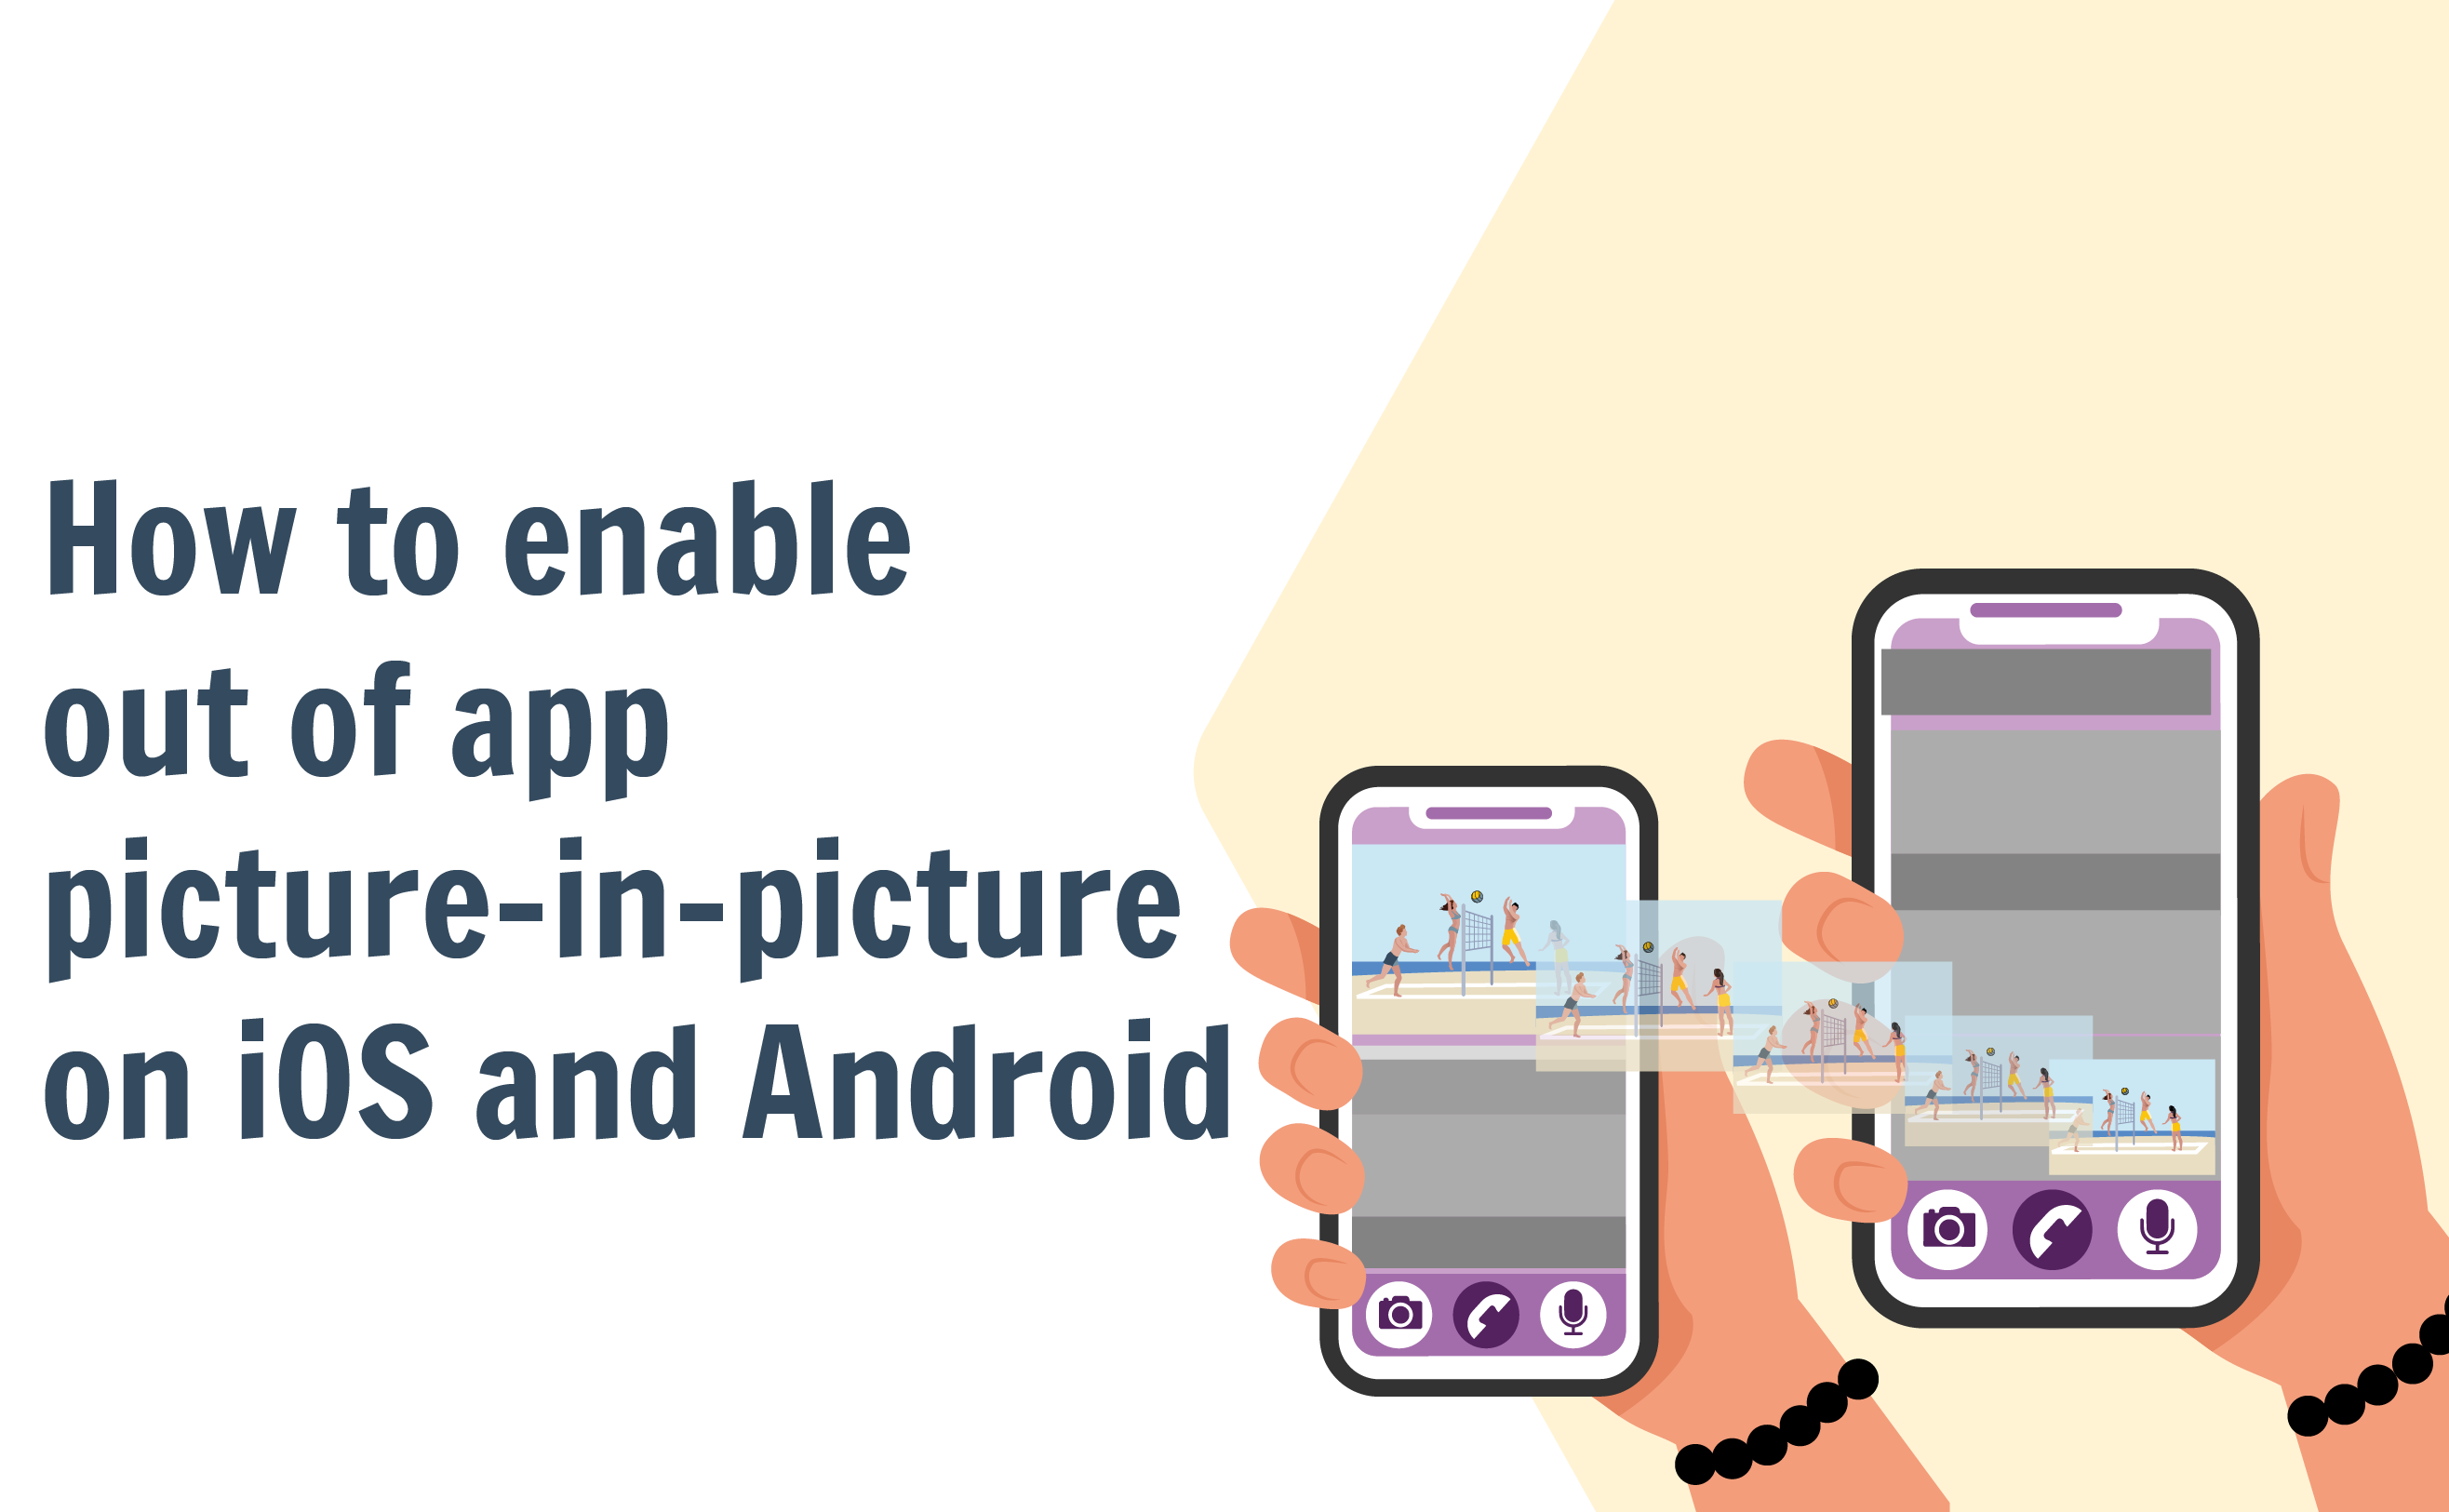 How to enable out of app picture-in-picture on iOS and Android